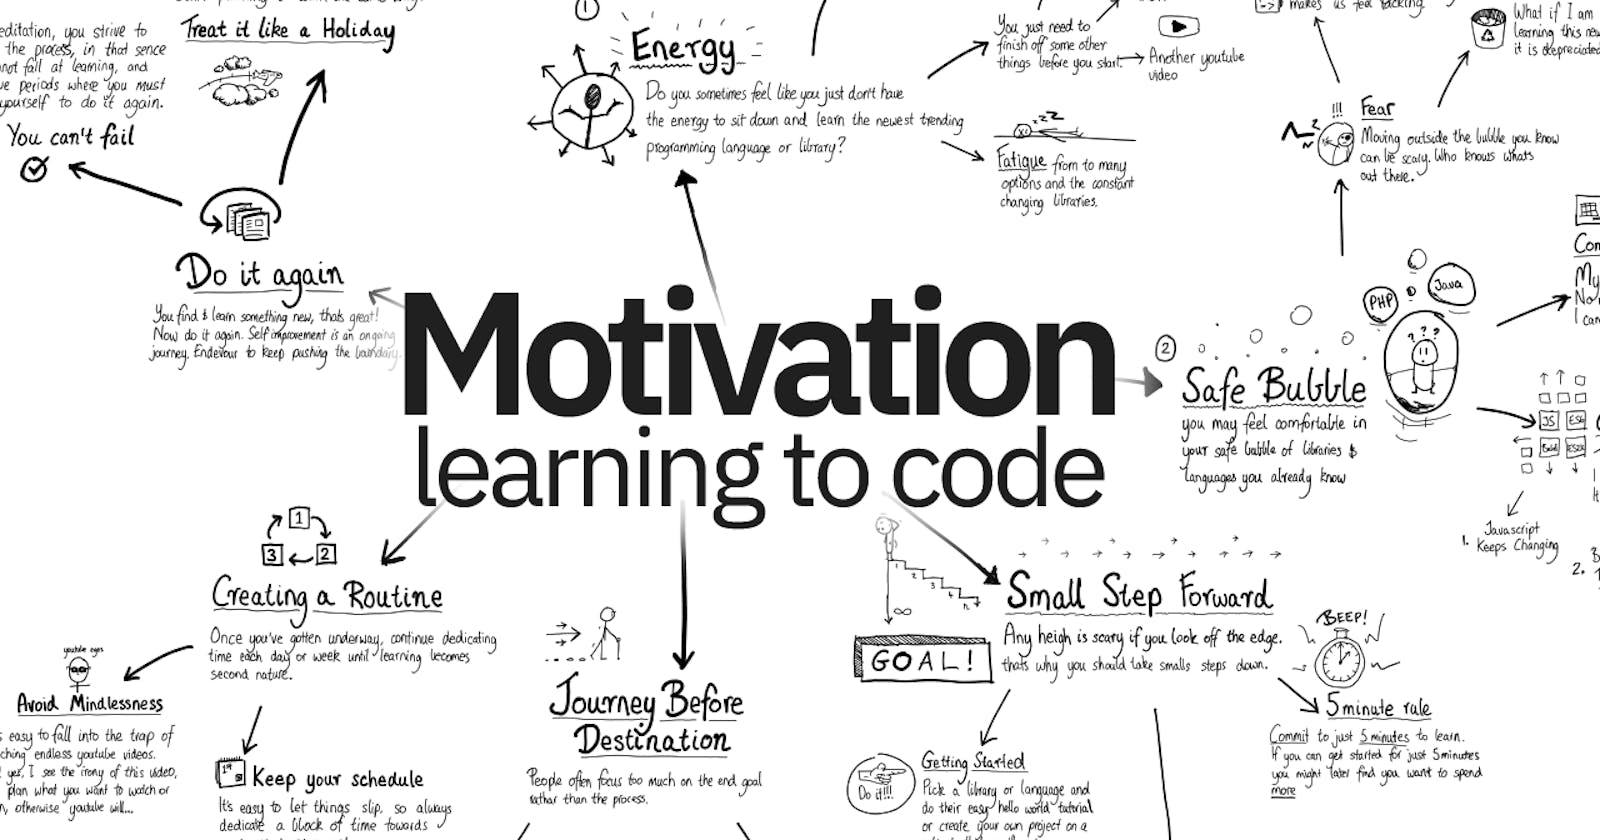 What to do if losing Motivation to Code?